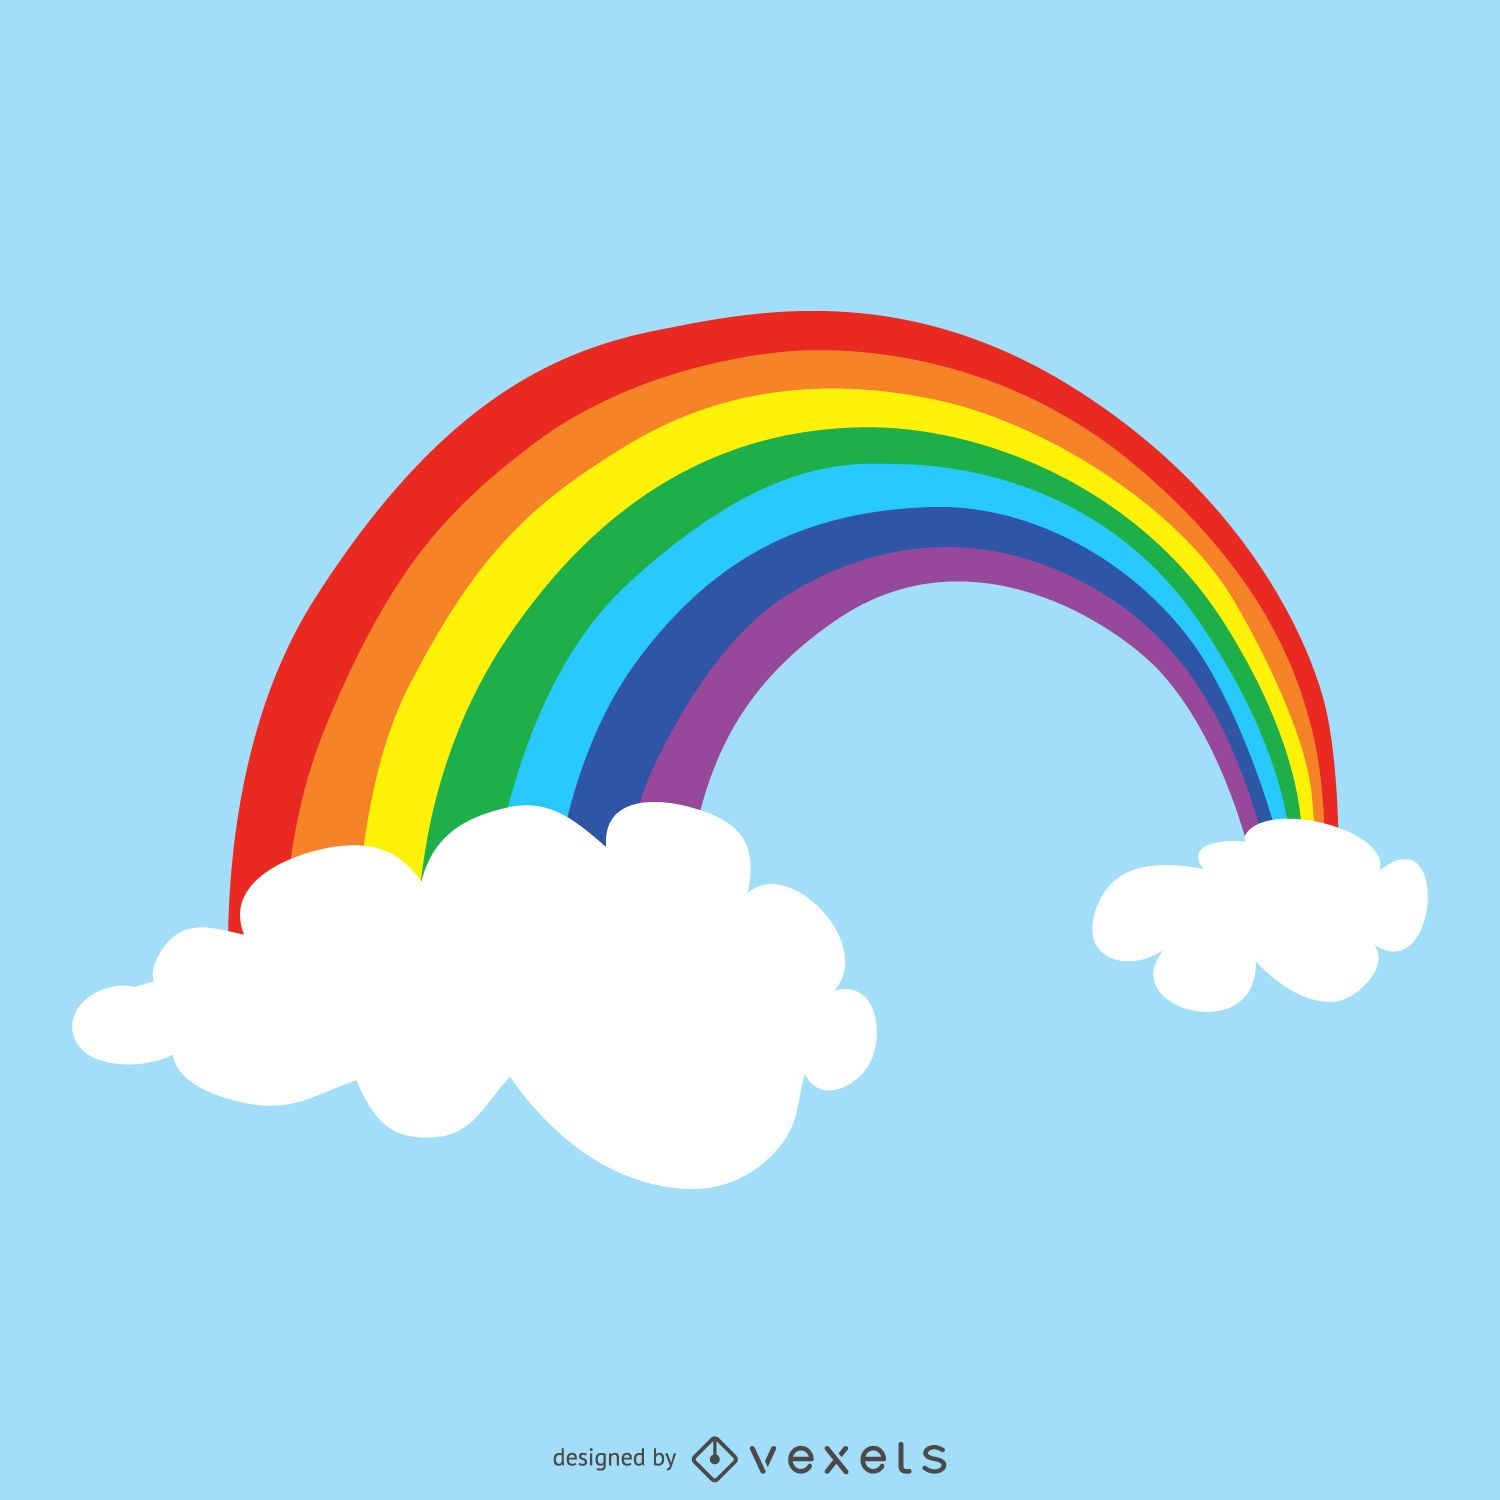 Bright Rainbow Drawing Vector Download